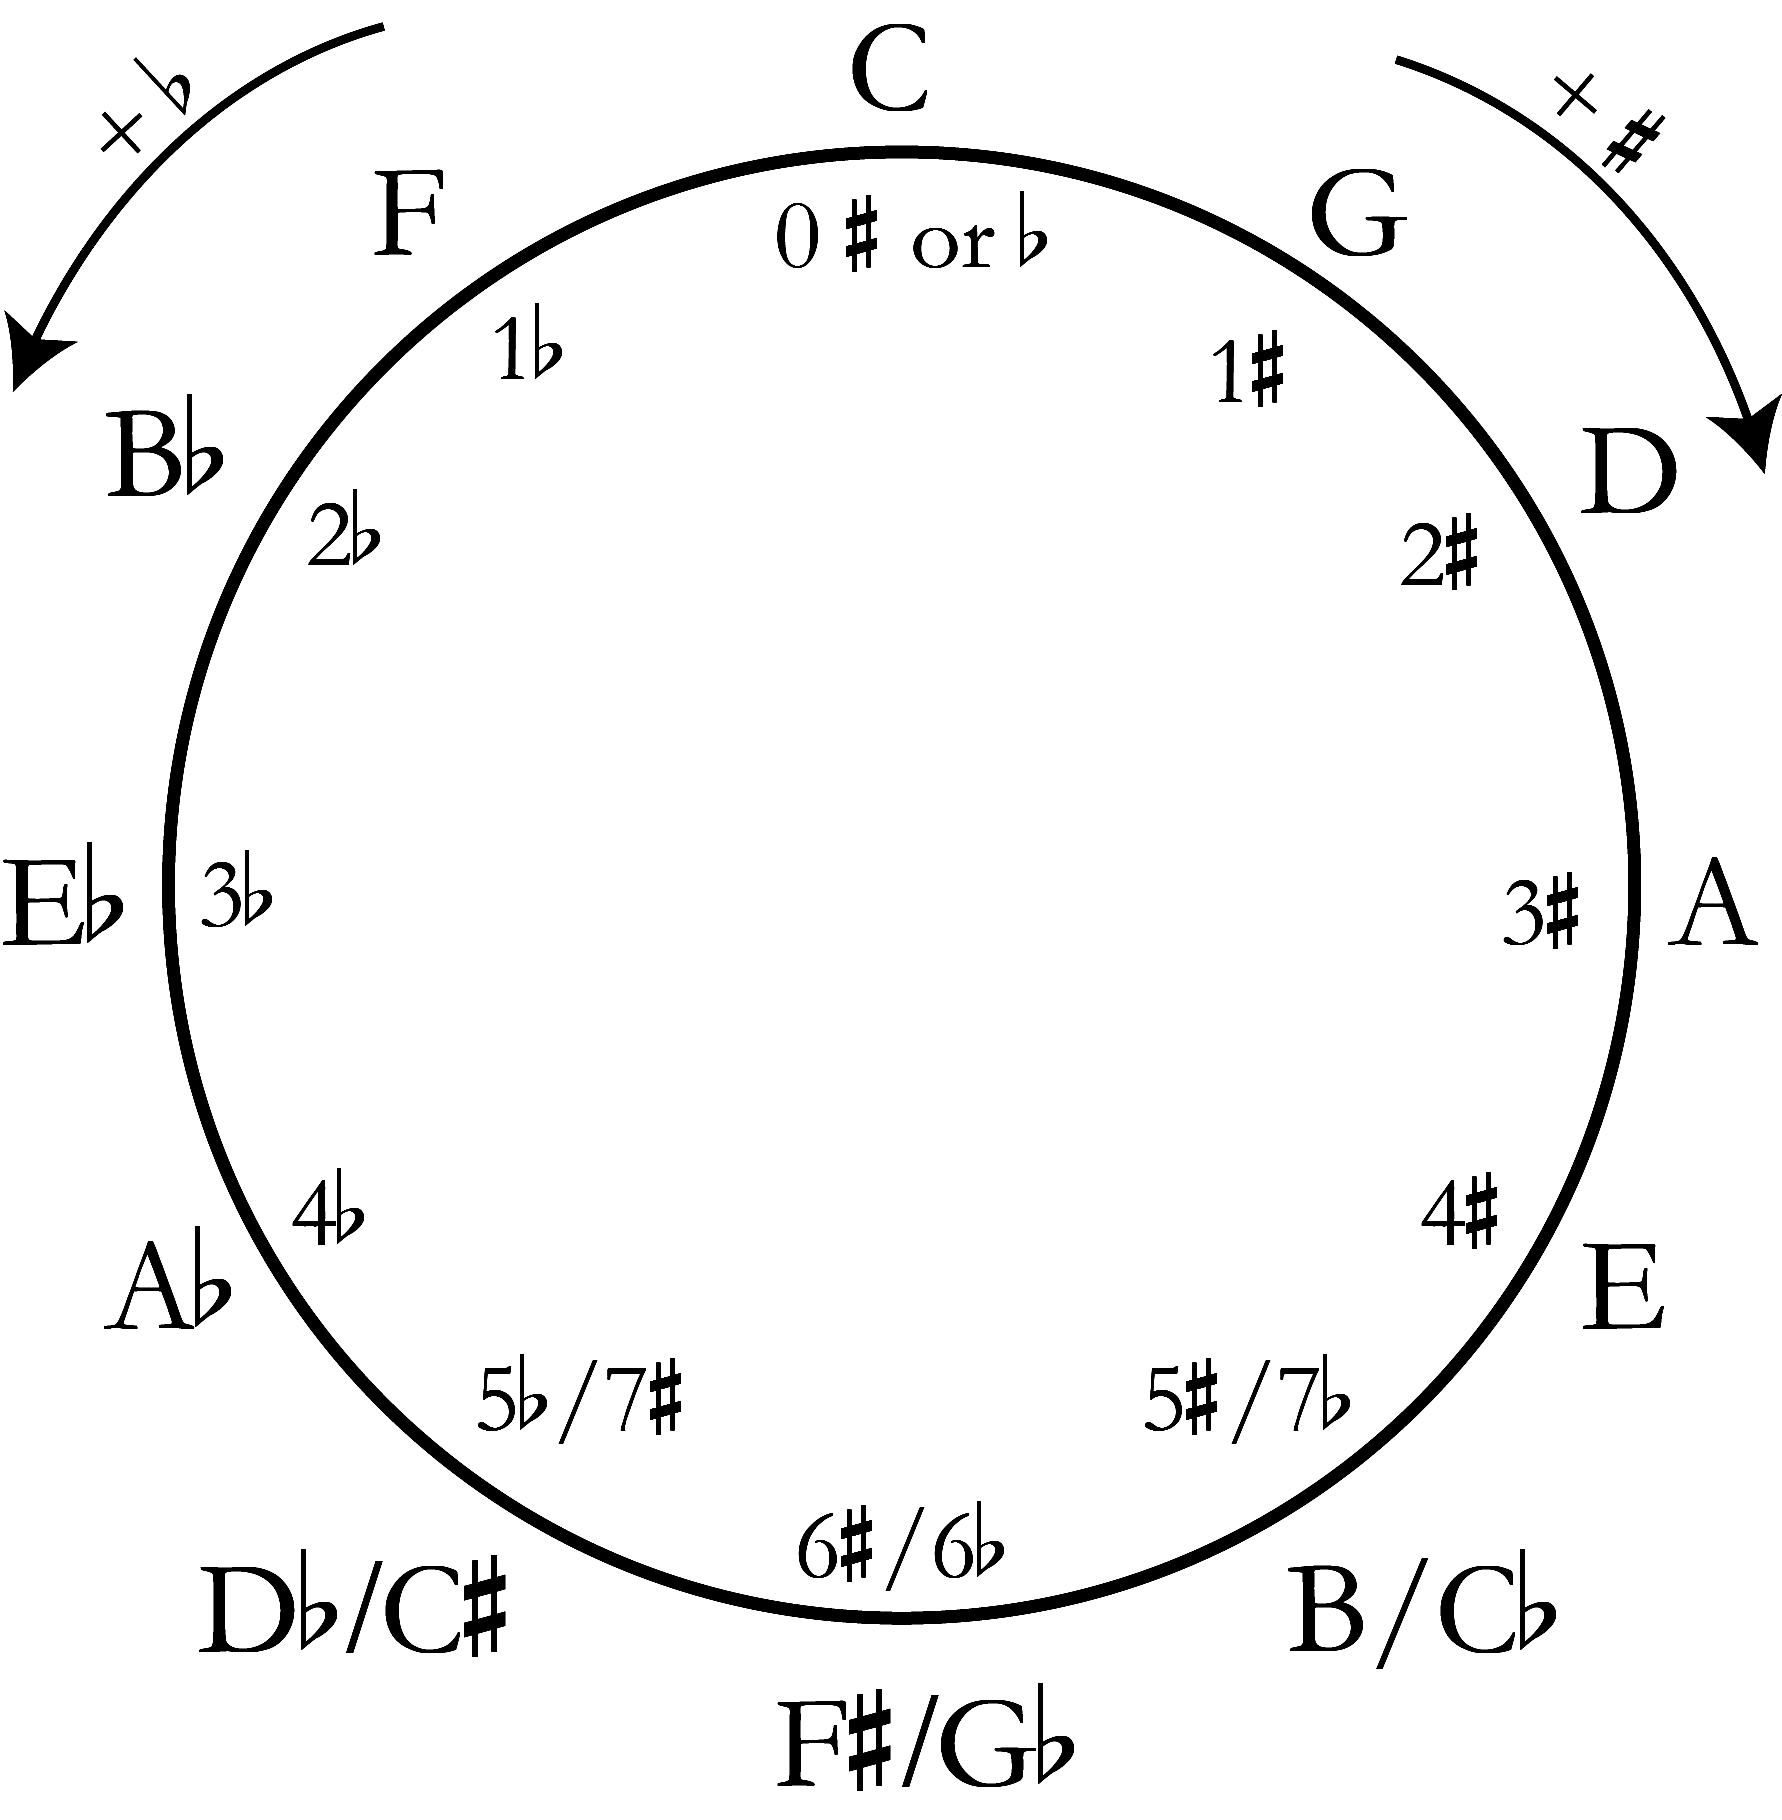 Major key signatures are placed around a circle in order of the number of their accidentals.